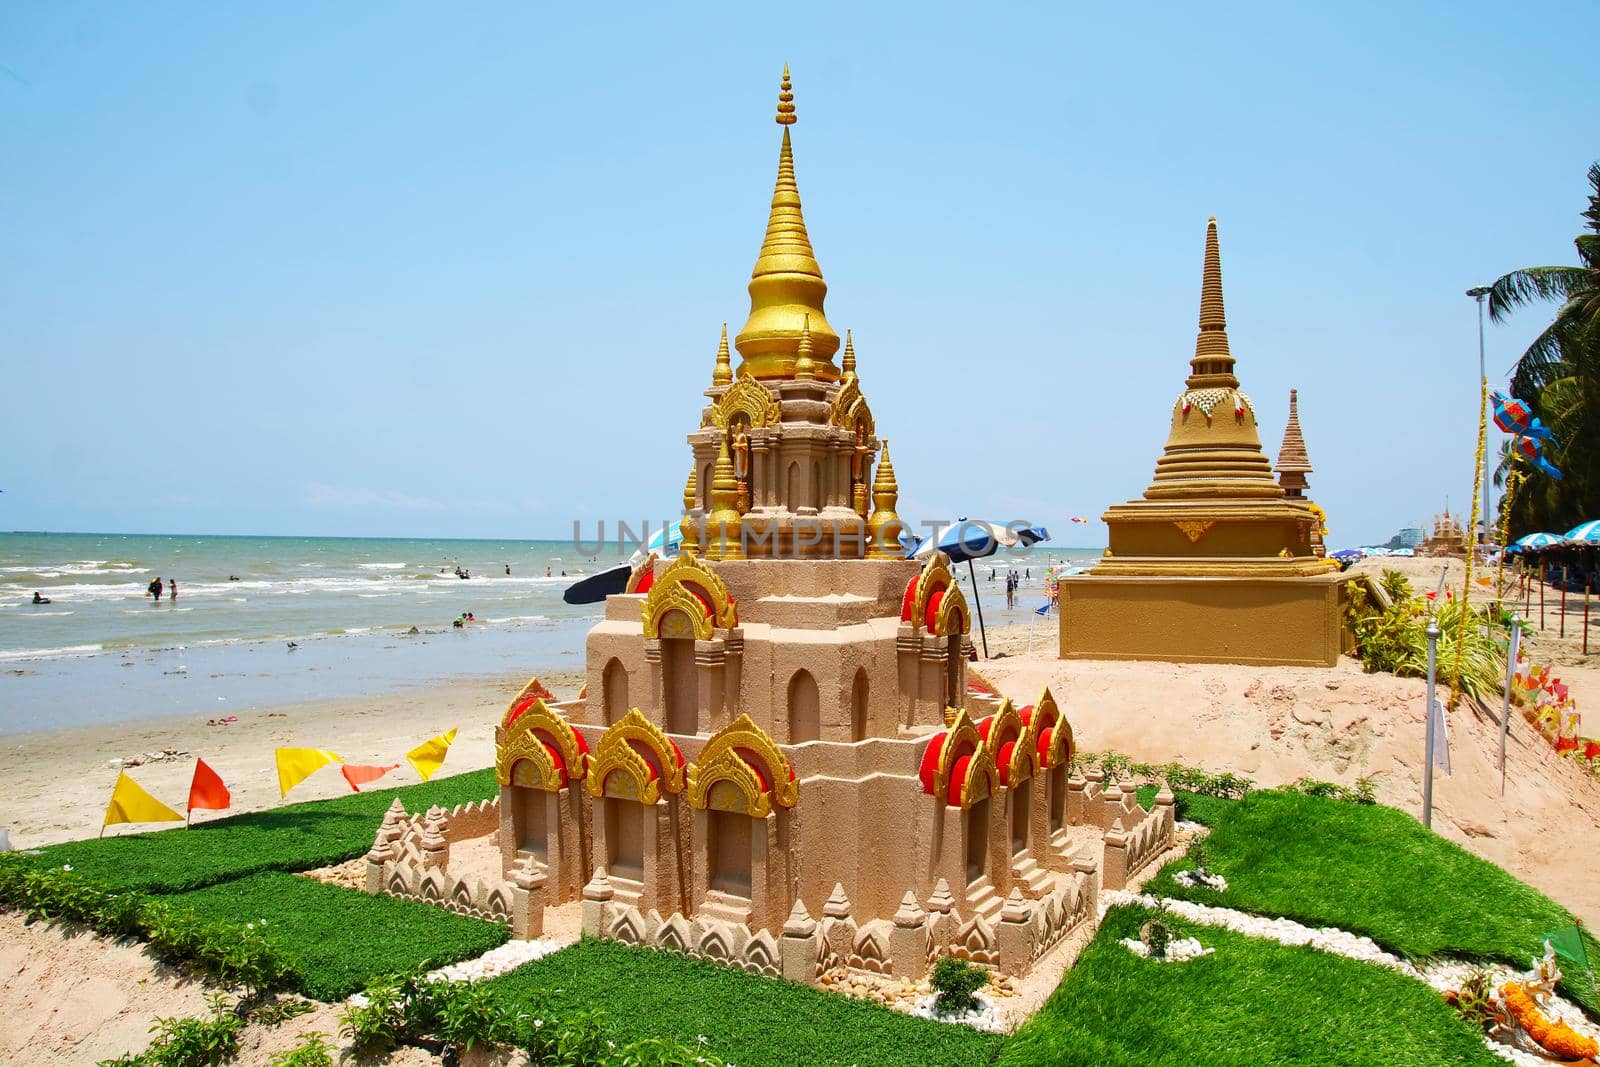 castle sand pagoda was carefully built, and beautifully decorated Songkran festival by Darkfox